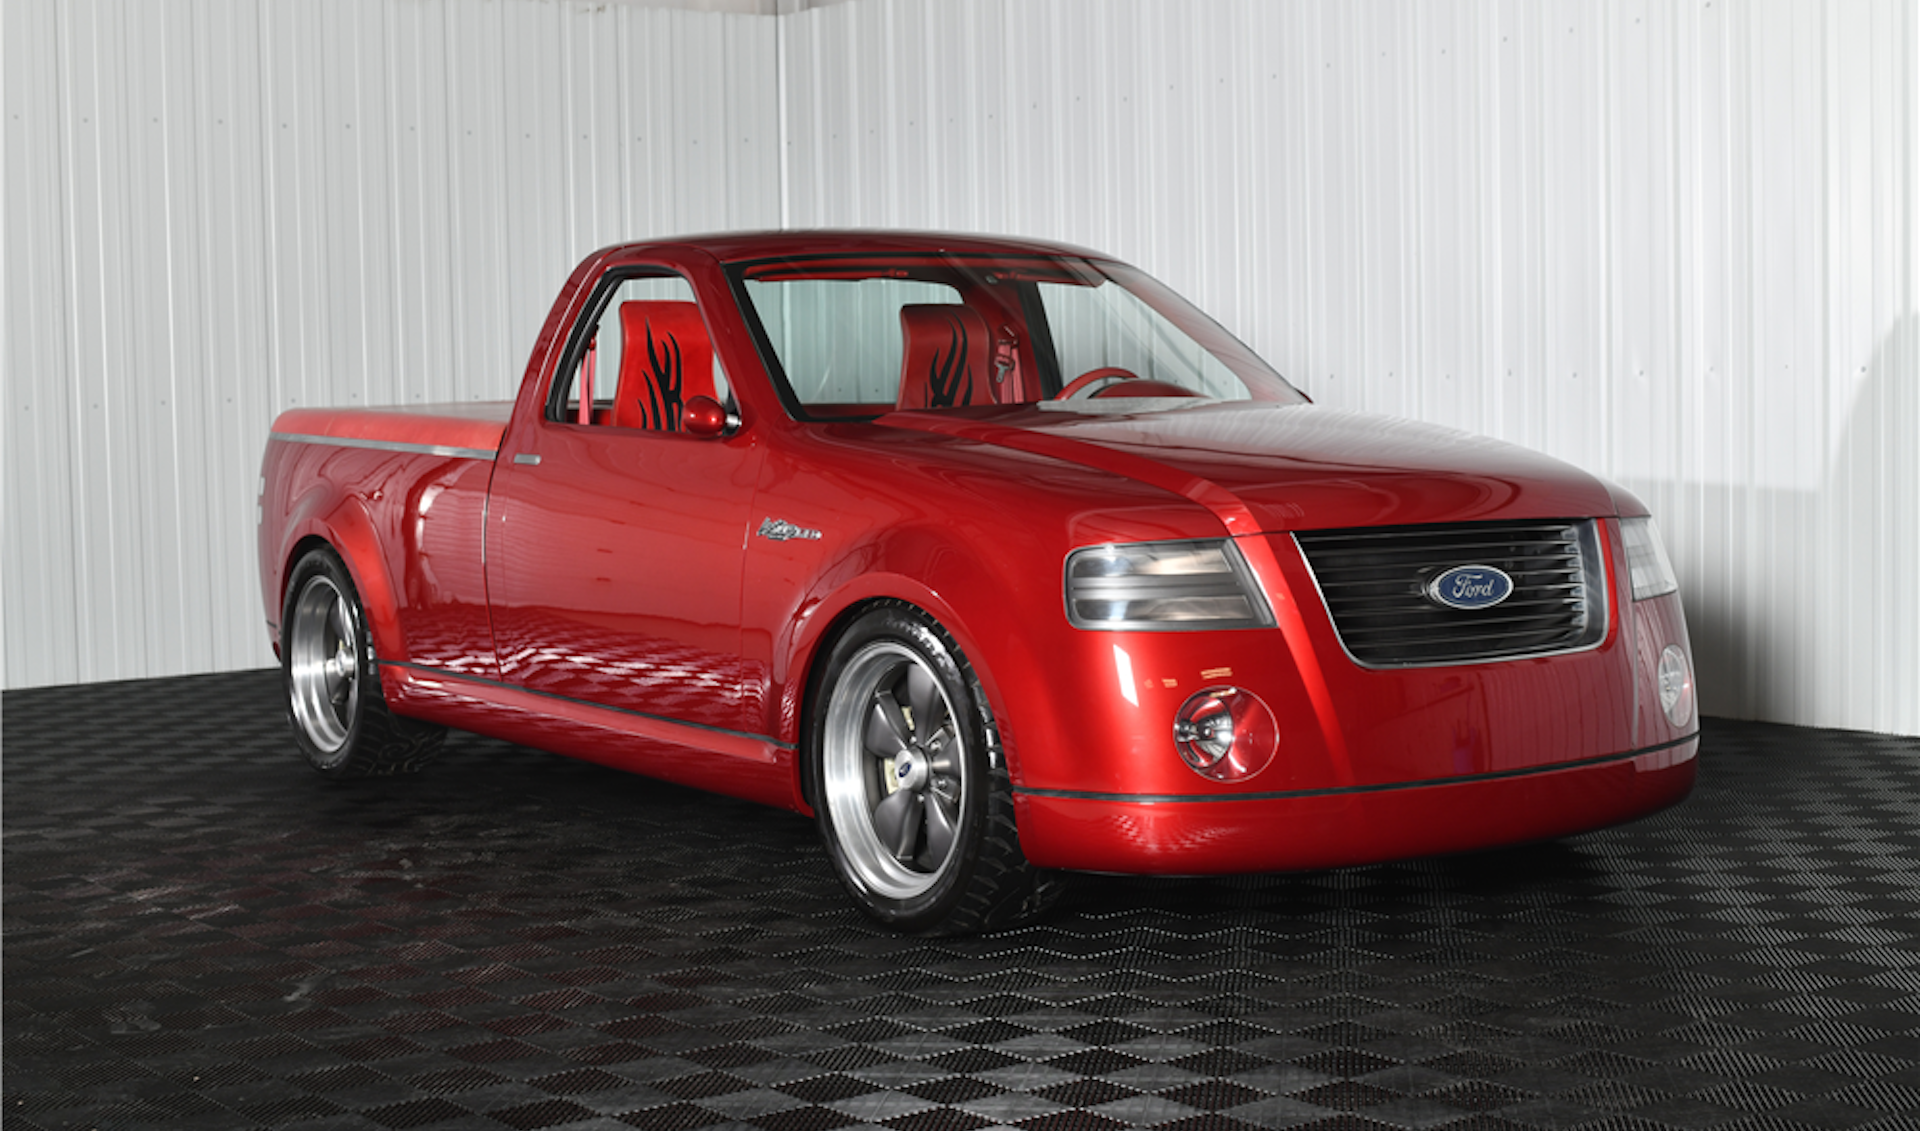 You Can Now Buy a 2001 F-150 Lightning Concept That You Can’t Legally Drive